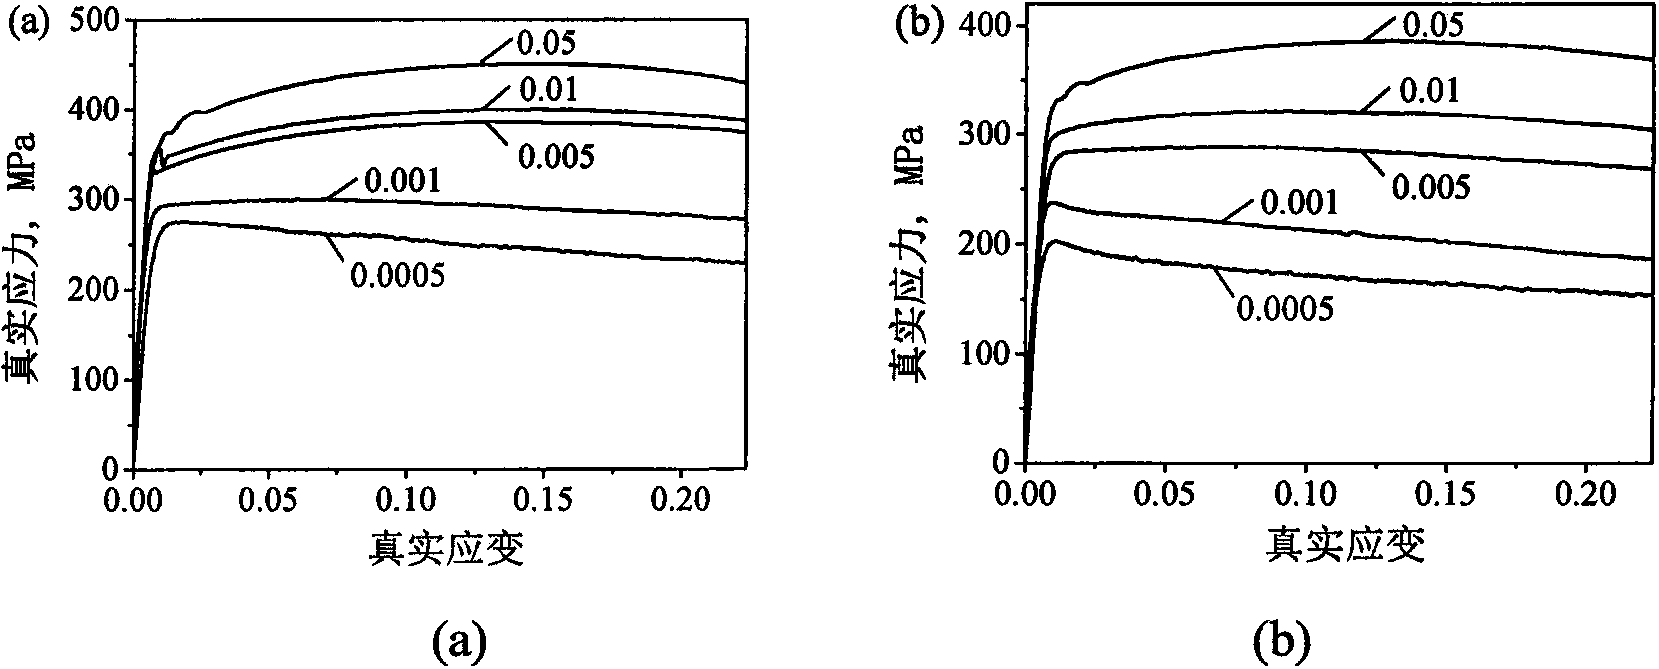 Numerical simulation method for thermal composite forming of titanium alloy